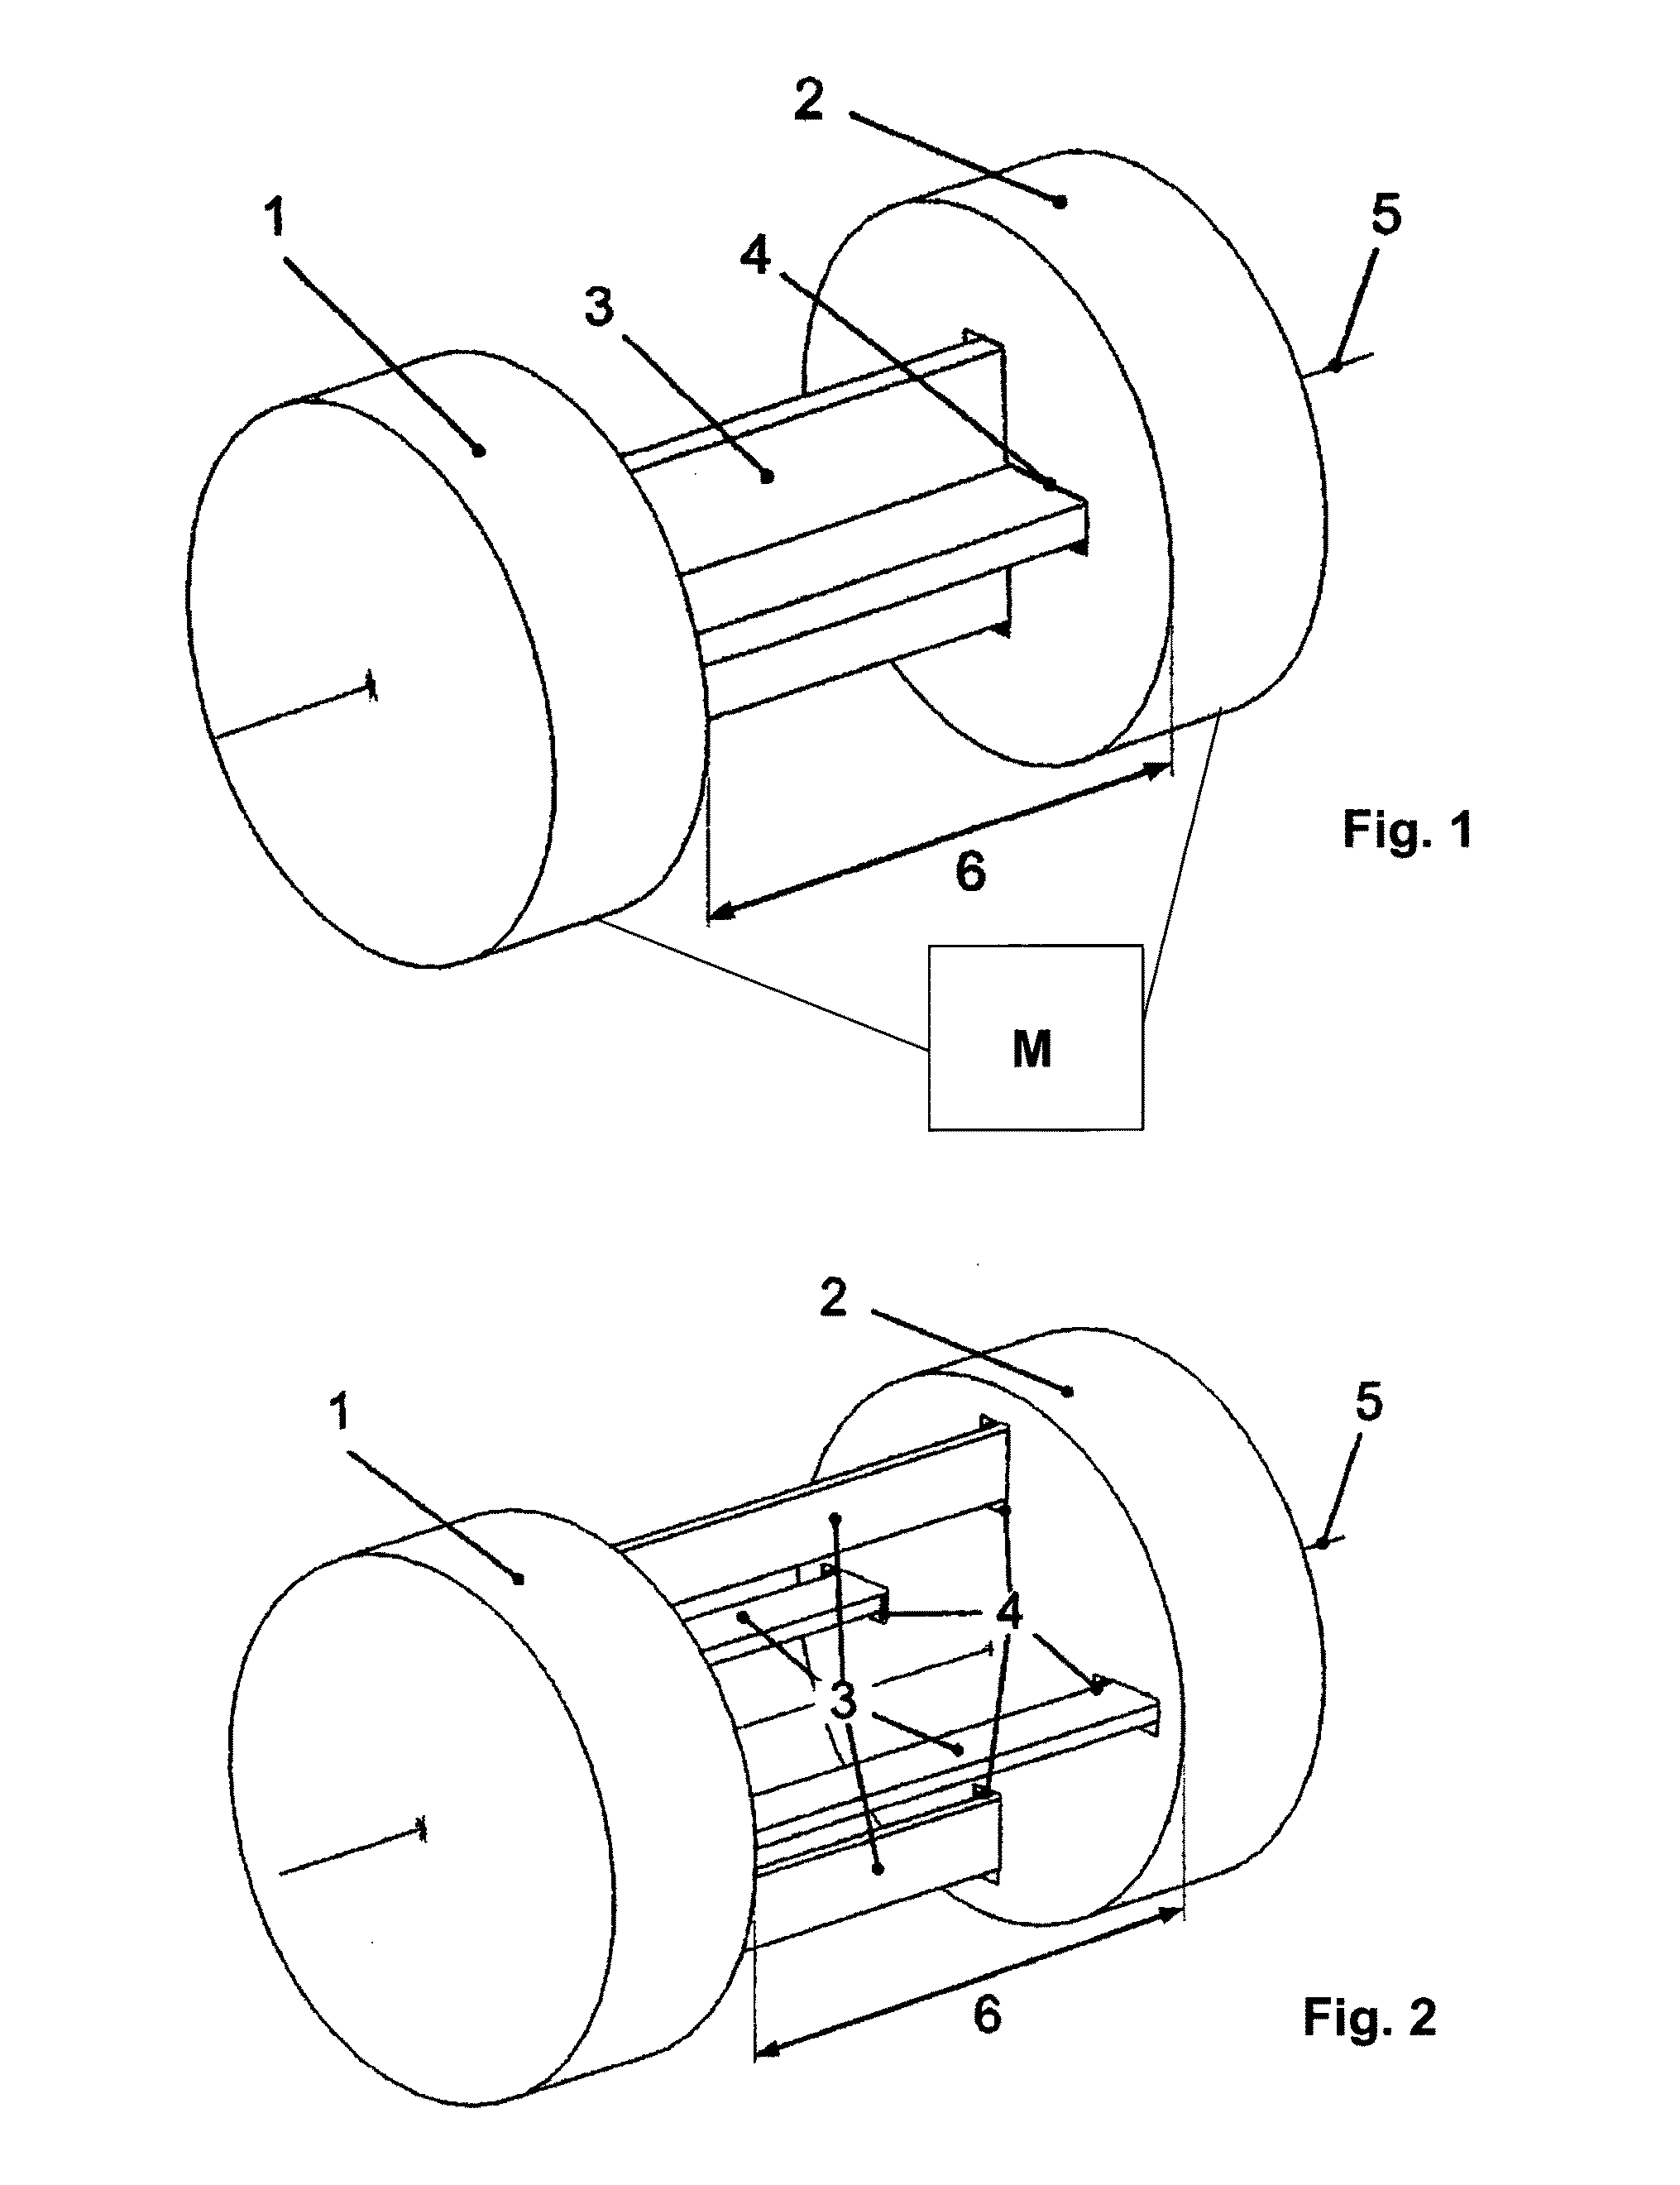 Shaft arrangement and method for relaying torques acting around a rotational axis